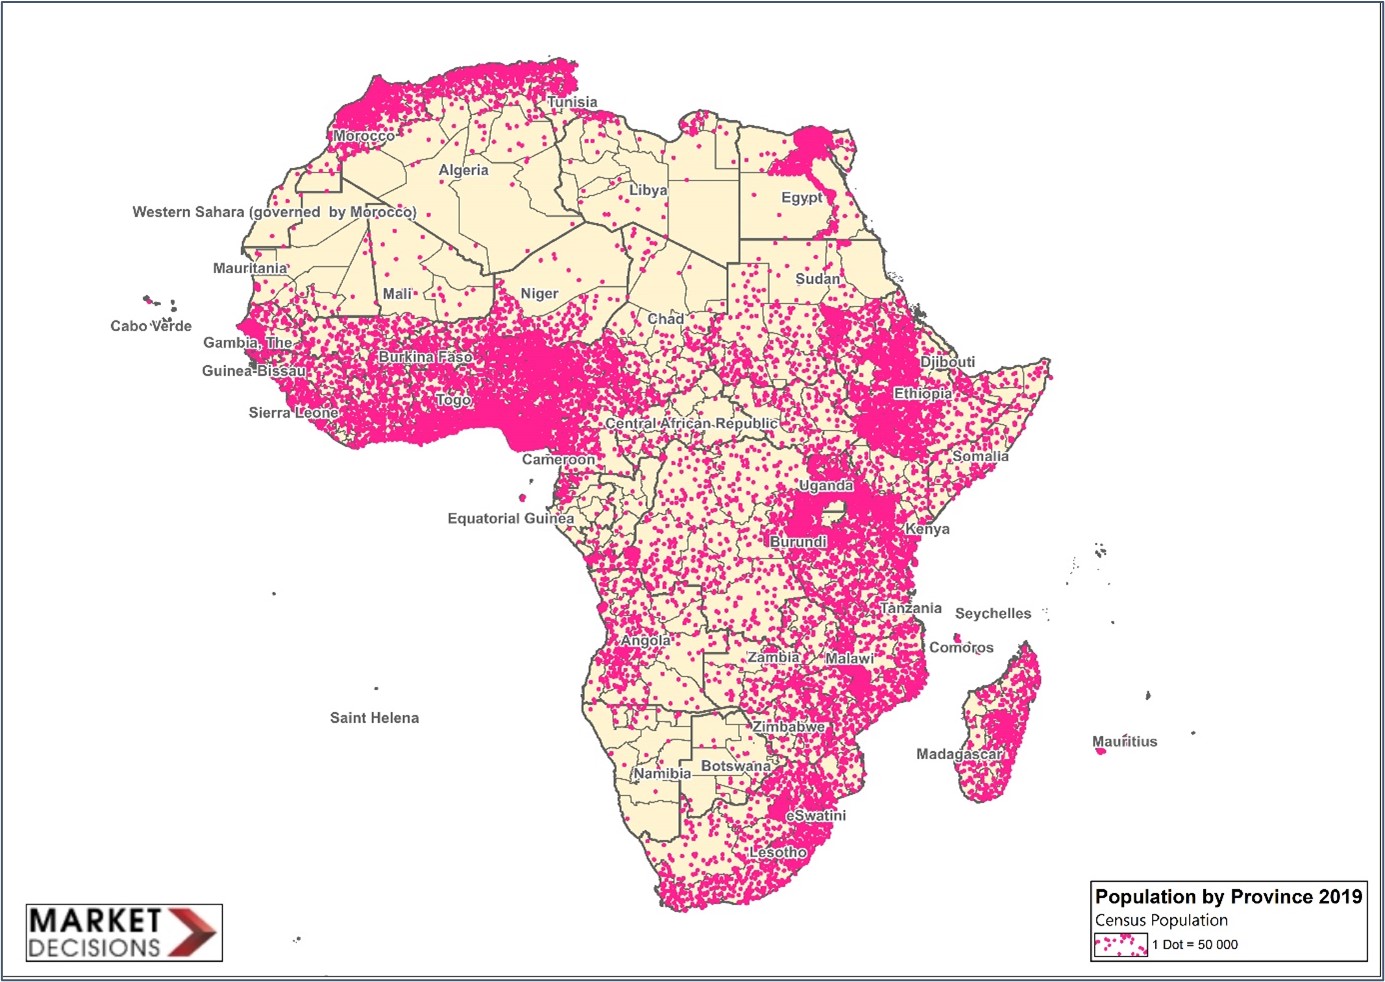 AfricaProfilerMap of African continent detailing population by province 2019